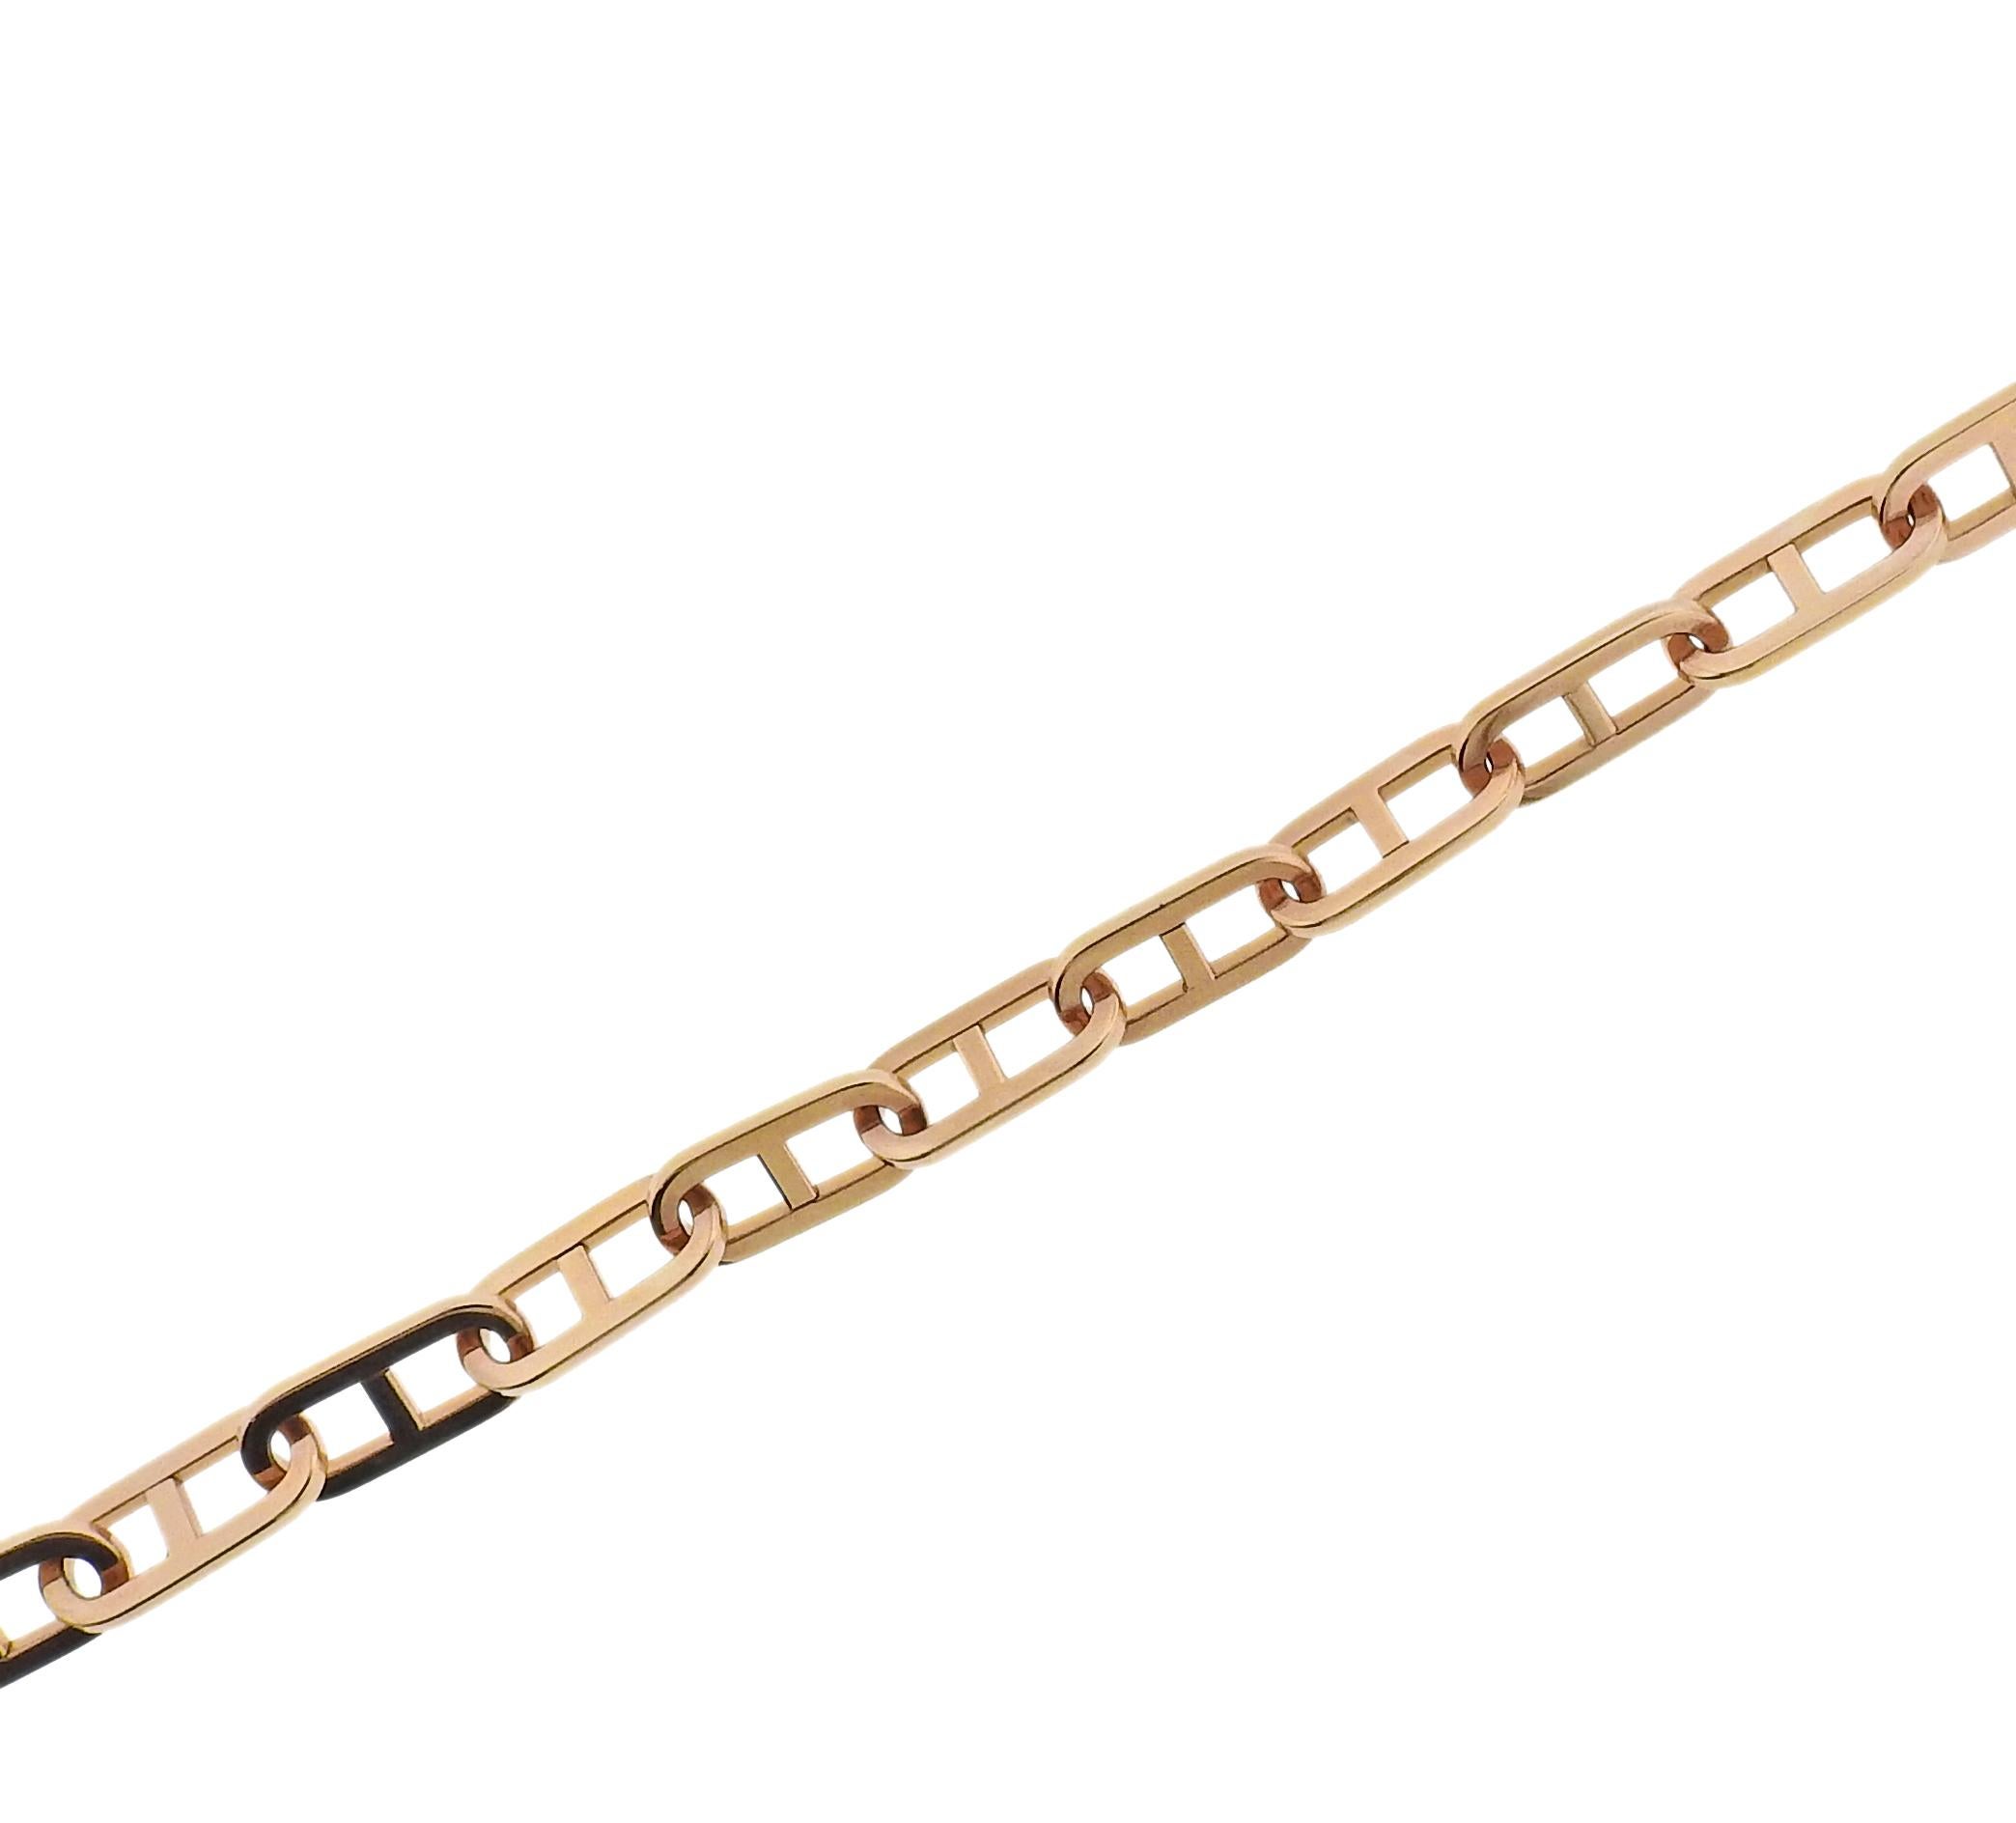 Brand new with tag Bucherer link bracelet in rose gold. Retail $12590. Come with box. Bracelet is 9